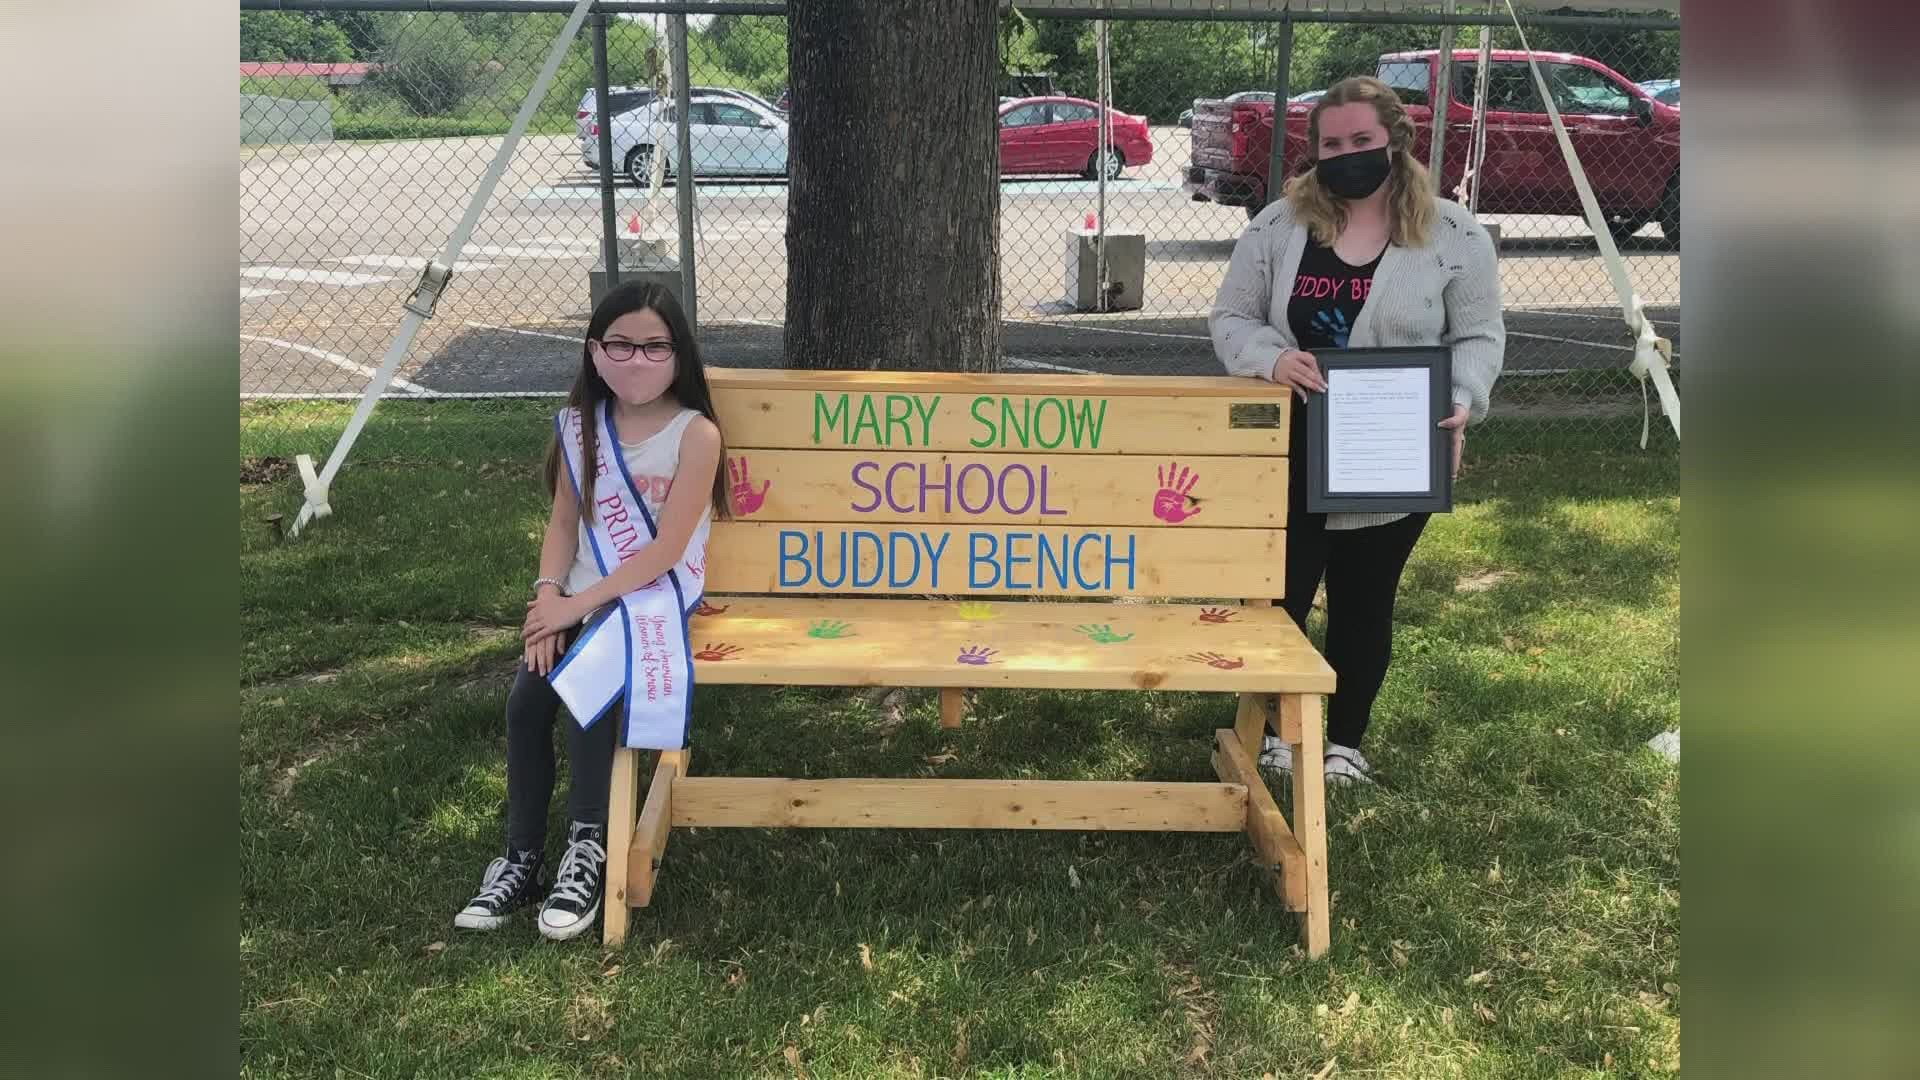 Kallie McPheters is a 4th grader at the Mary Snow School, and she wanted to make sure that anyone in need of a friend had a place to find one on the playground.